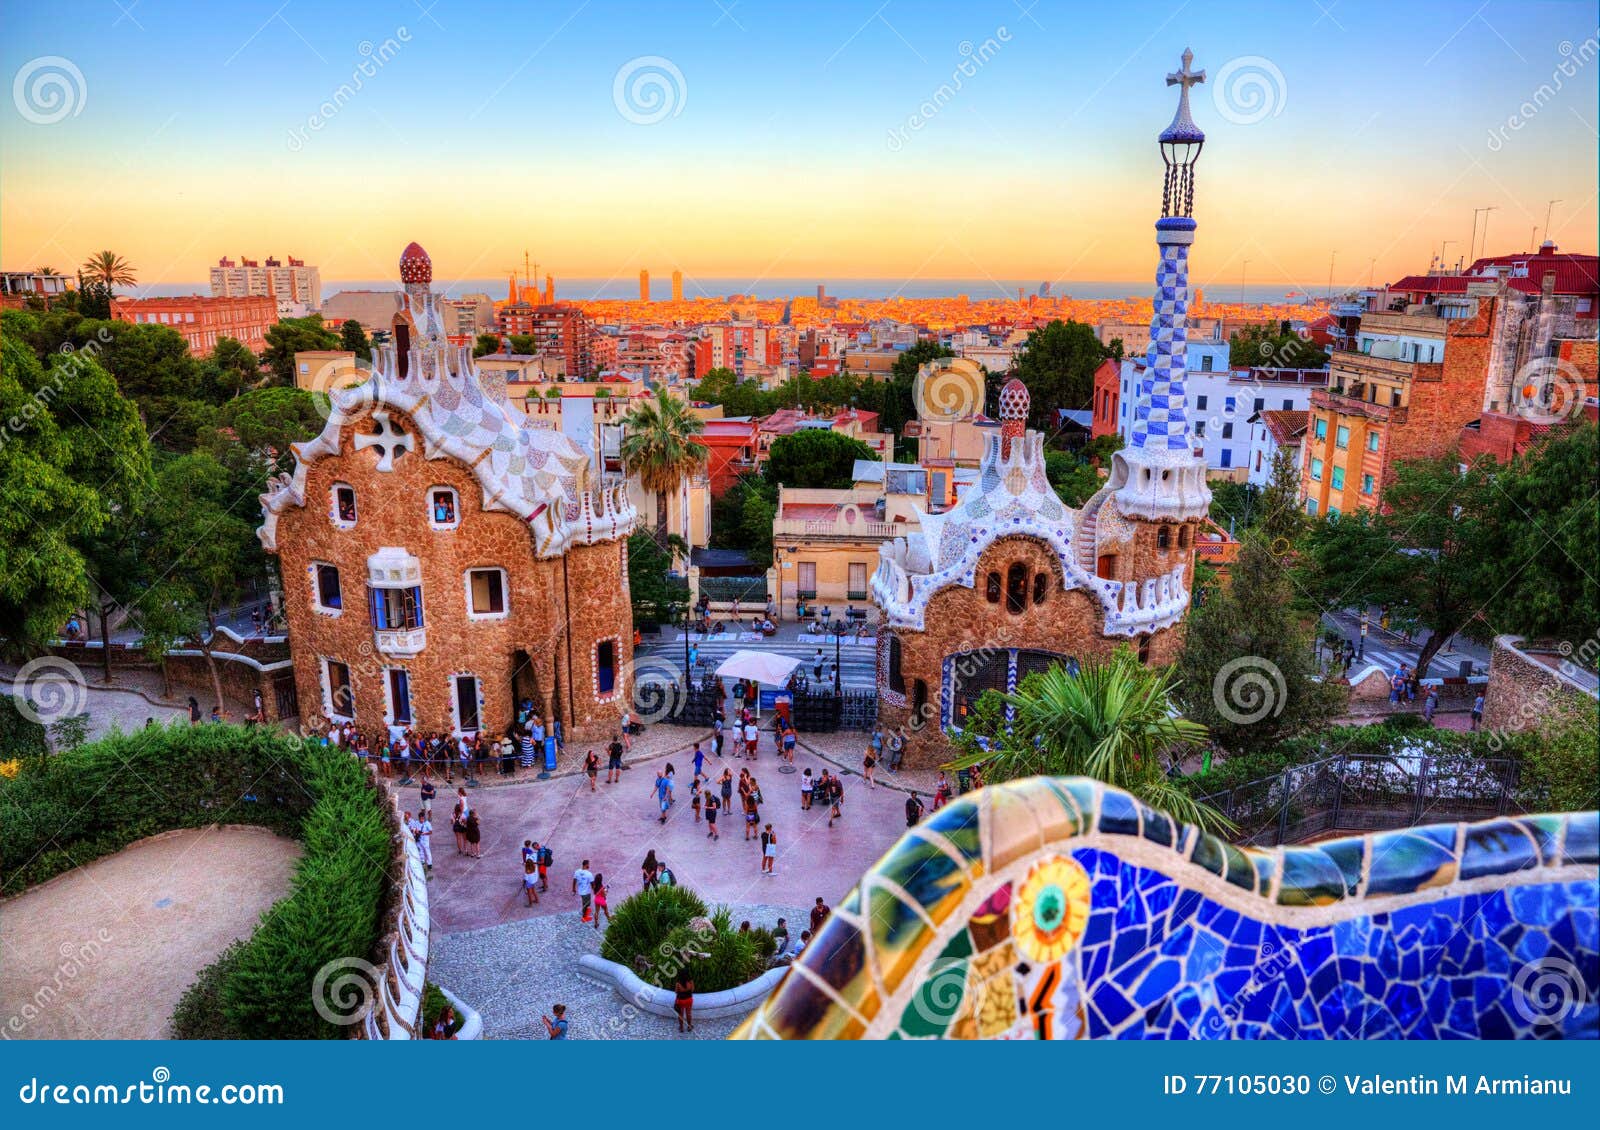 park guell, barcelona, spain at sunset